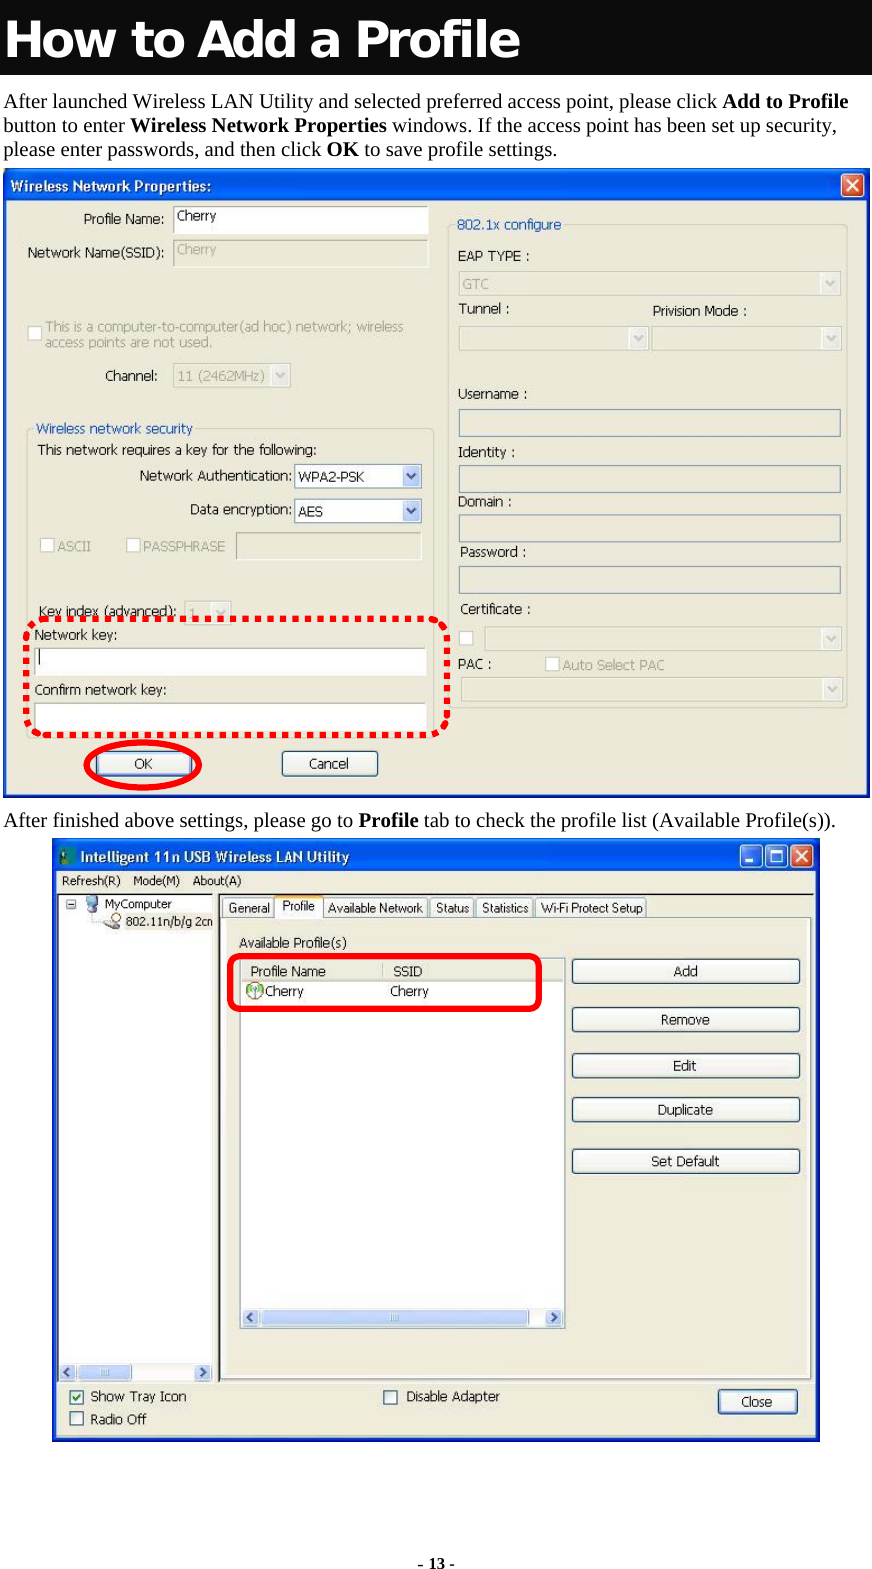  - 13 - How to Add a Profile After launched Wireless LAN Utility and selected preferred access point, please click Add to Profile button to enter Wireless Network Properties windows. If the access point has been set up security, please enter passwords, and then click OK to save profile settings.  After finished above settings, please go to Profile tab to check the profile list (Available Profile(s)).  